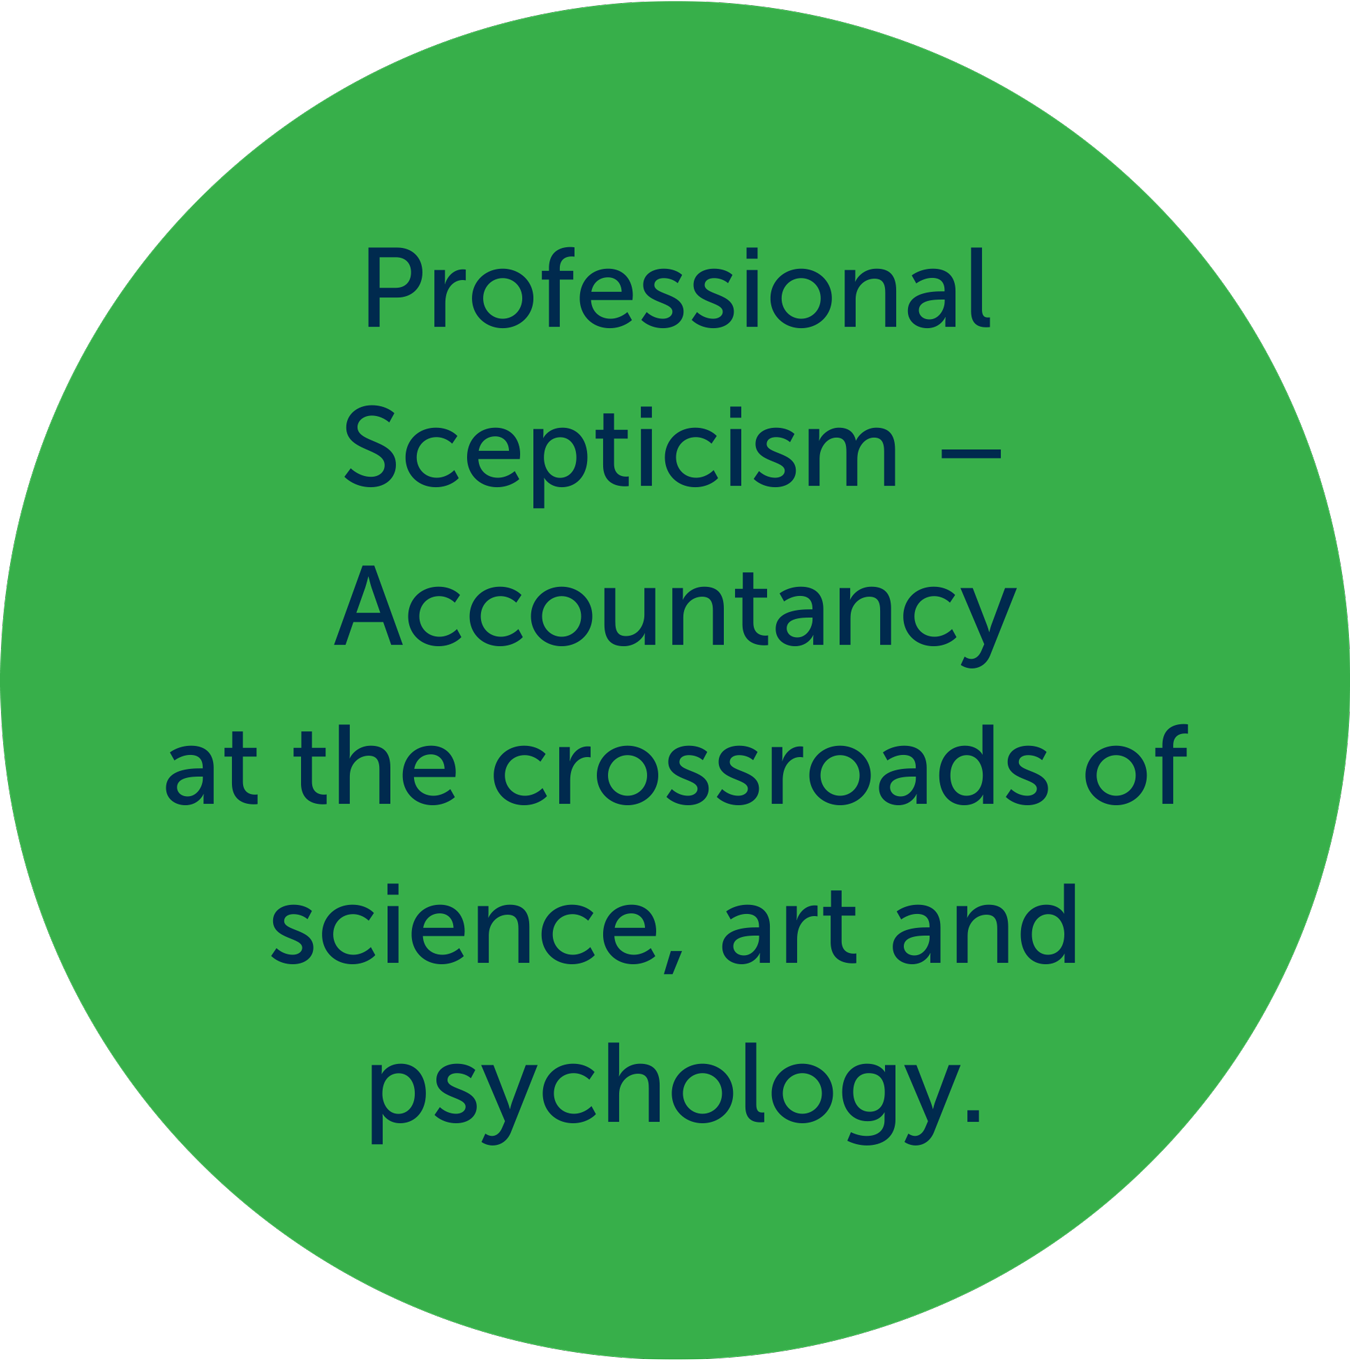 Professional Scepticism - Accountancy at the crossroads of science, art and psychology.